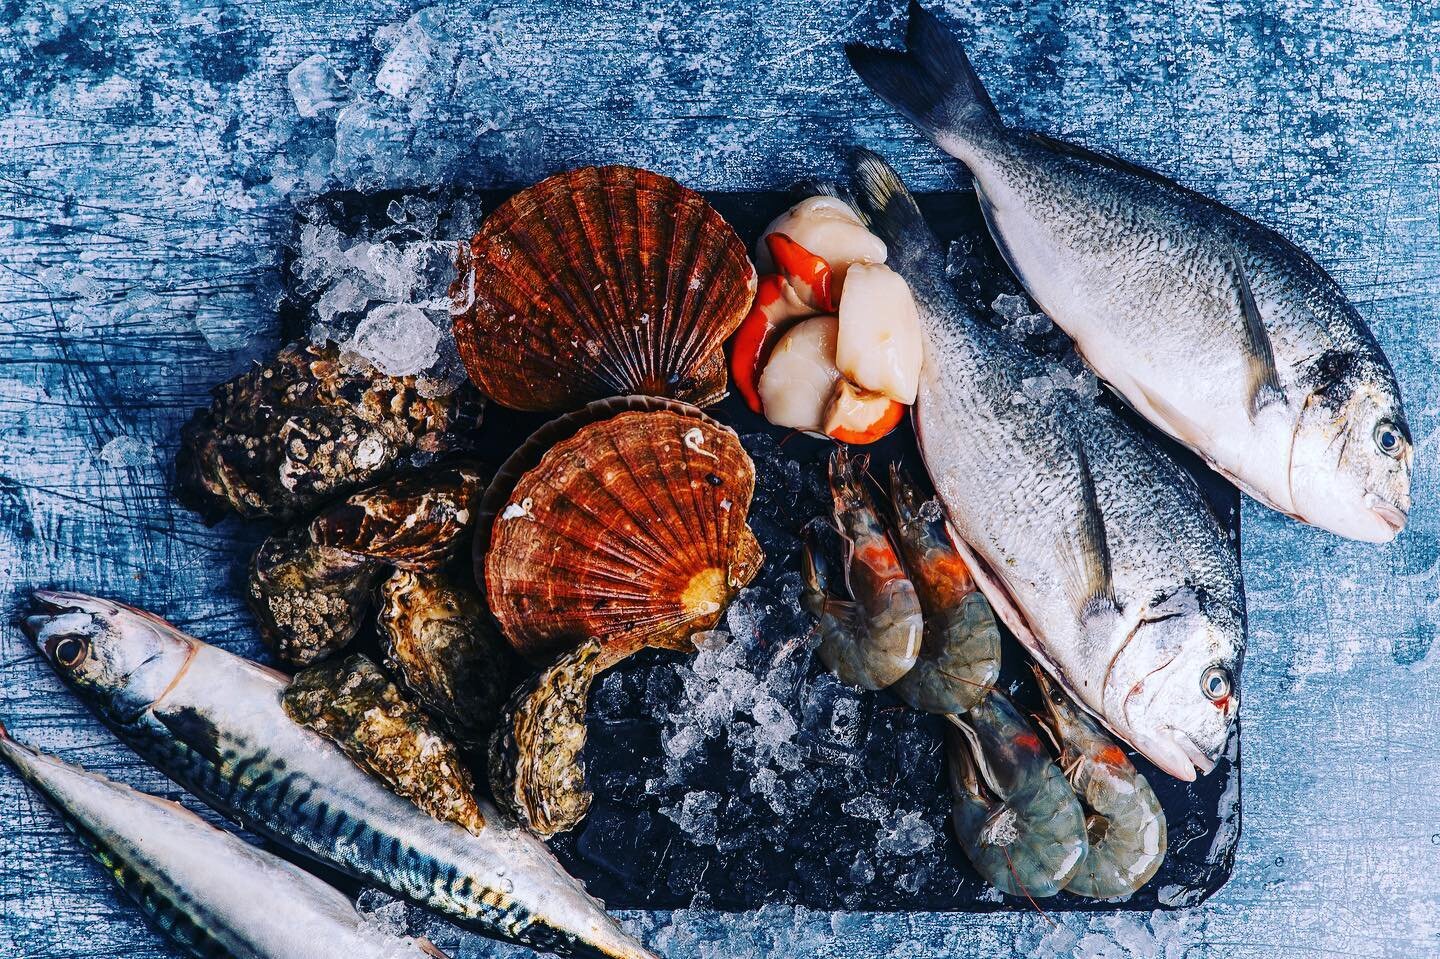 Happy New Year and a huge thank you to all our customers and fantastic suppliers. Your loyalty and support really does make all the hard work worth it. Best wishes for a happy and healthy 2022. Stuart 🐟🦞🥂